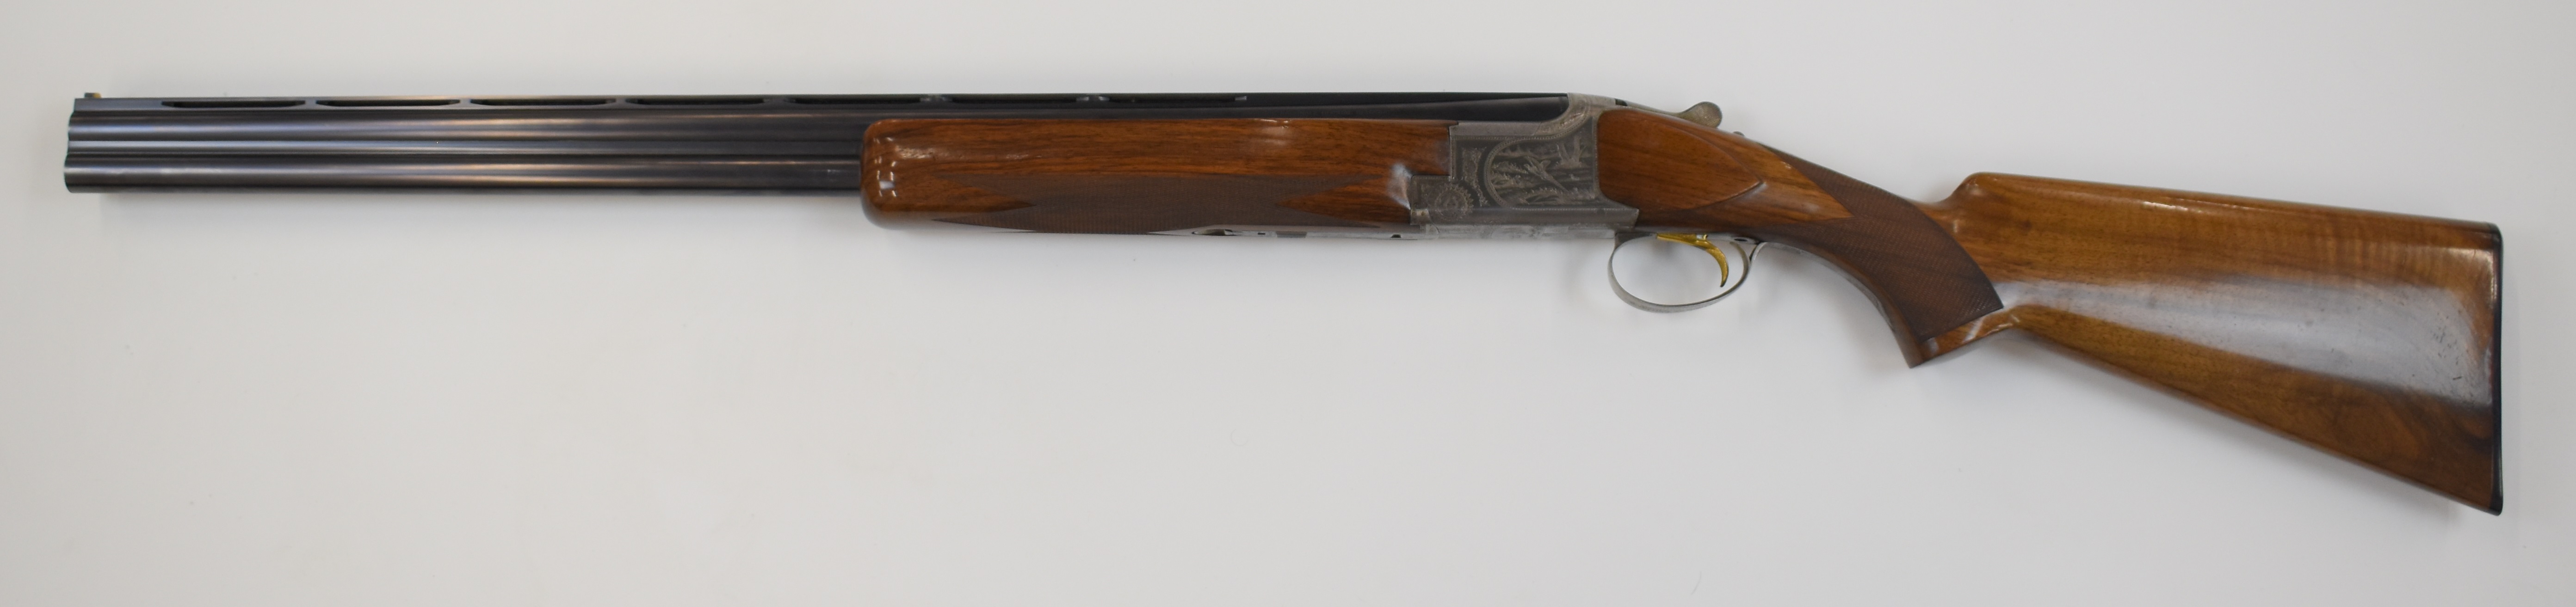 Browning B2 12 bore over and under shotgun with engraved scenes of birds to the locks and underside, - Image 9 of 12